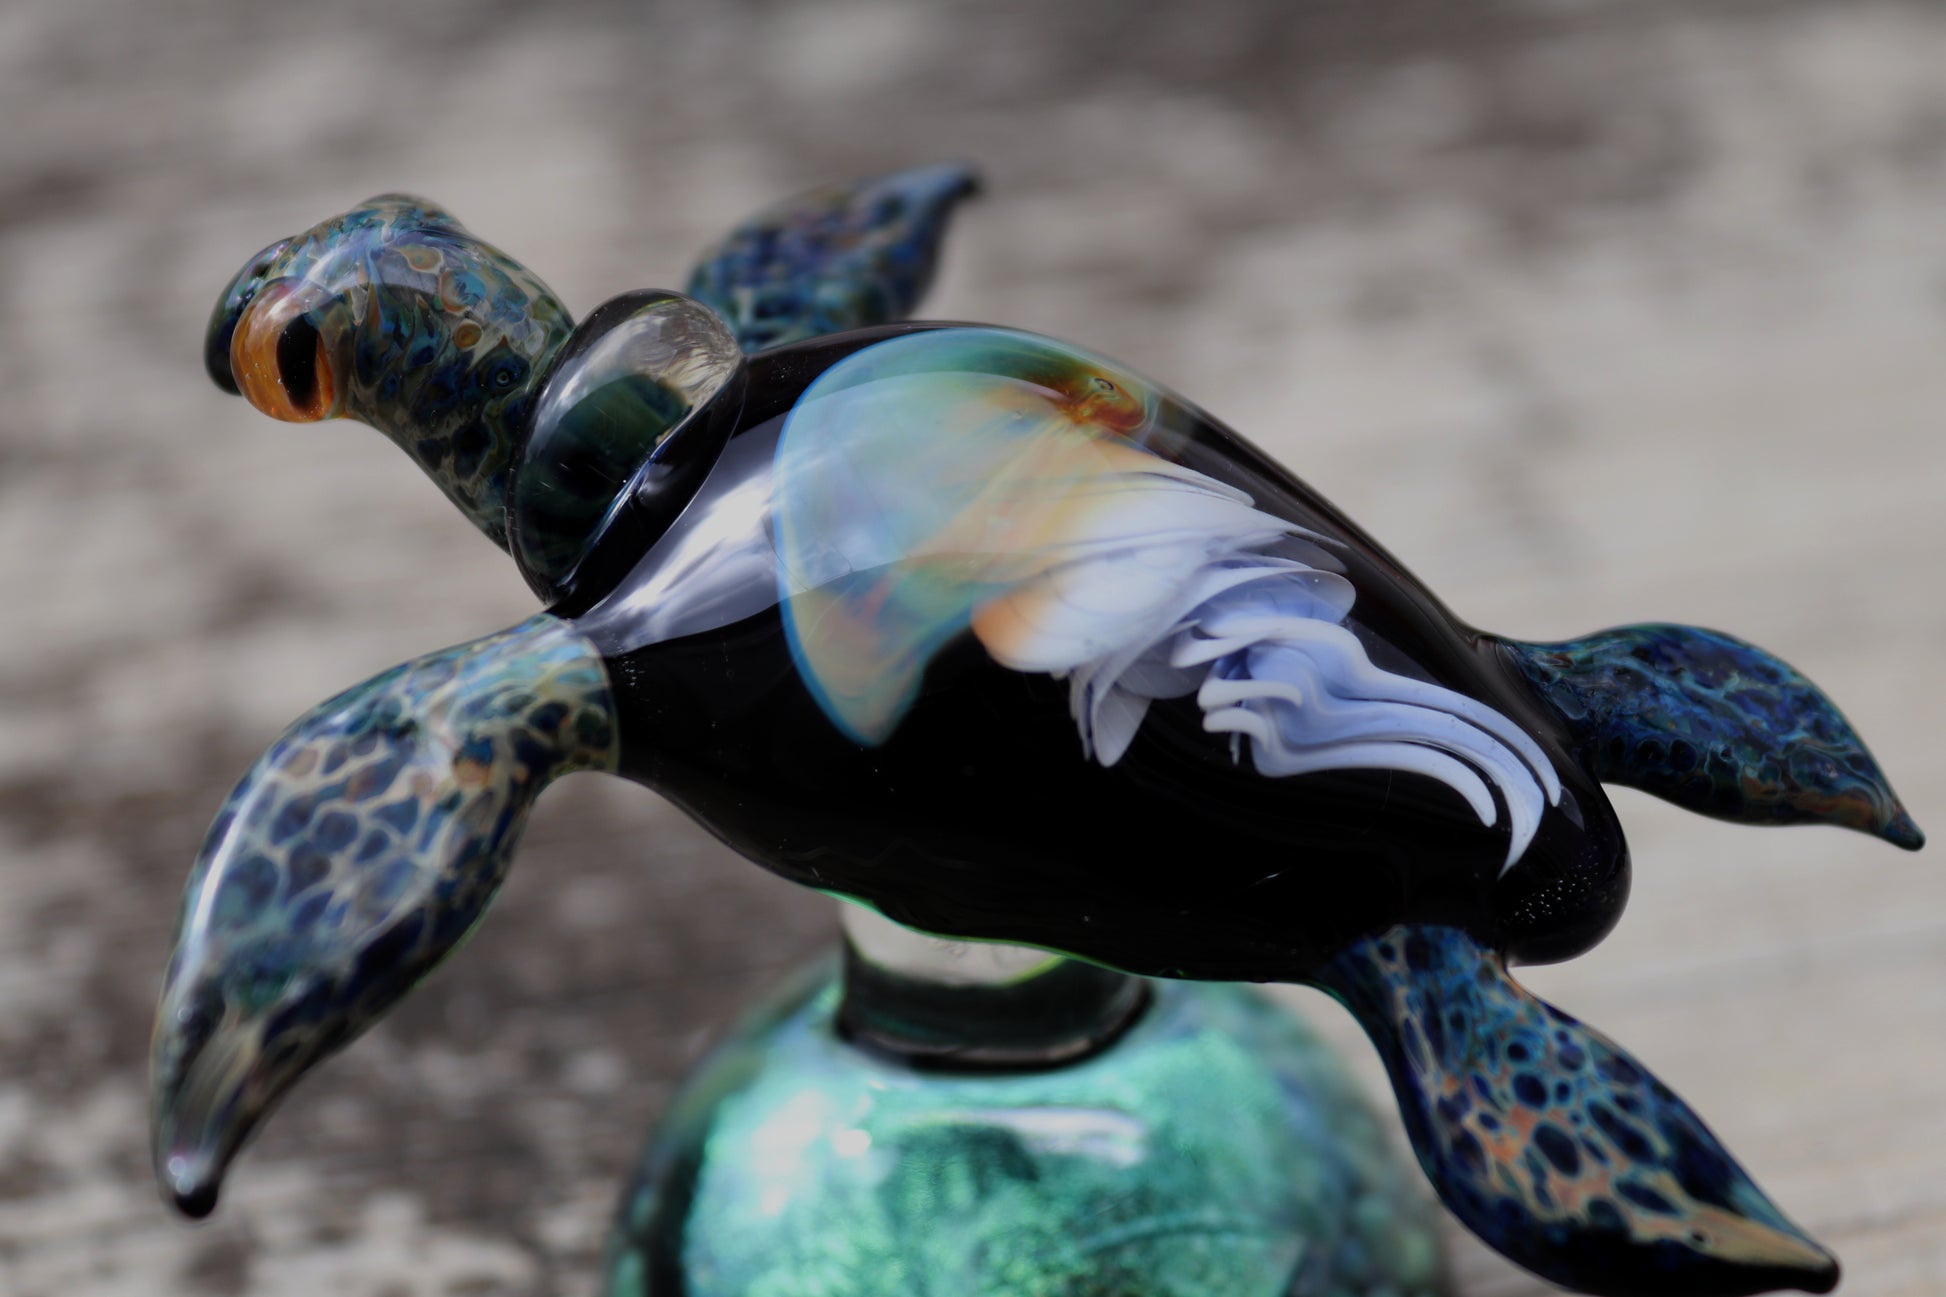 Unique Sea Turtle Sculpture with Opal Colored Jellyfish Inside. - GLASSnFIRE